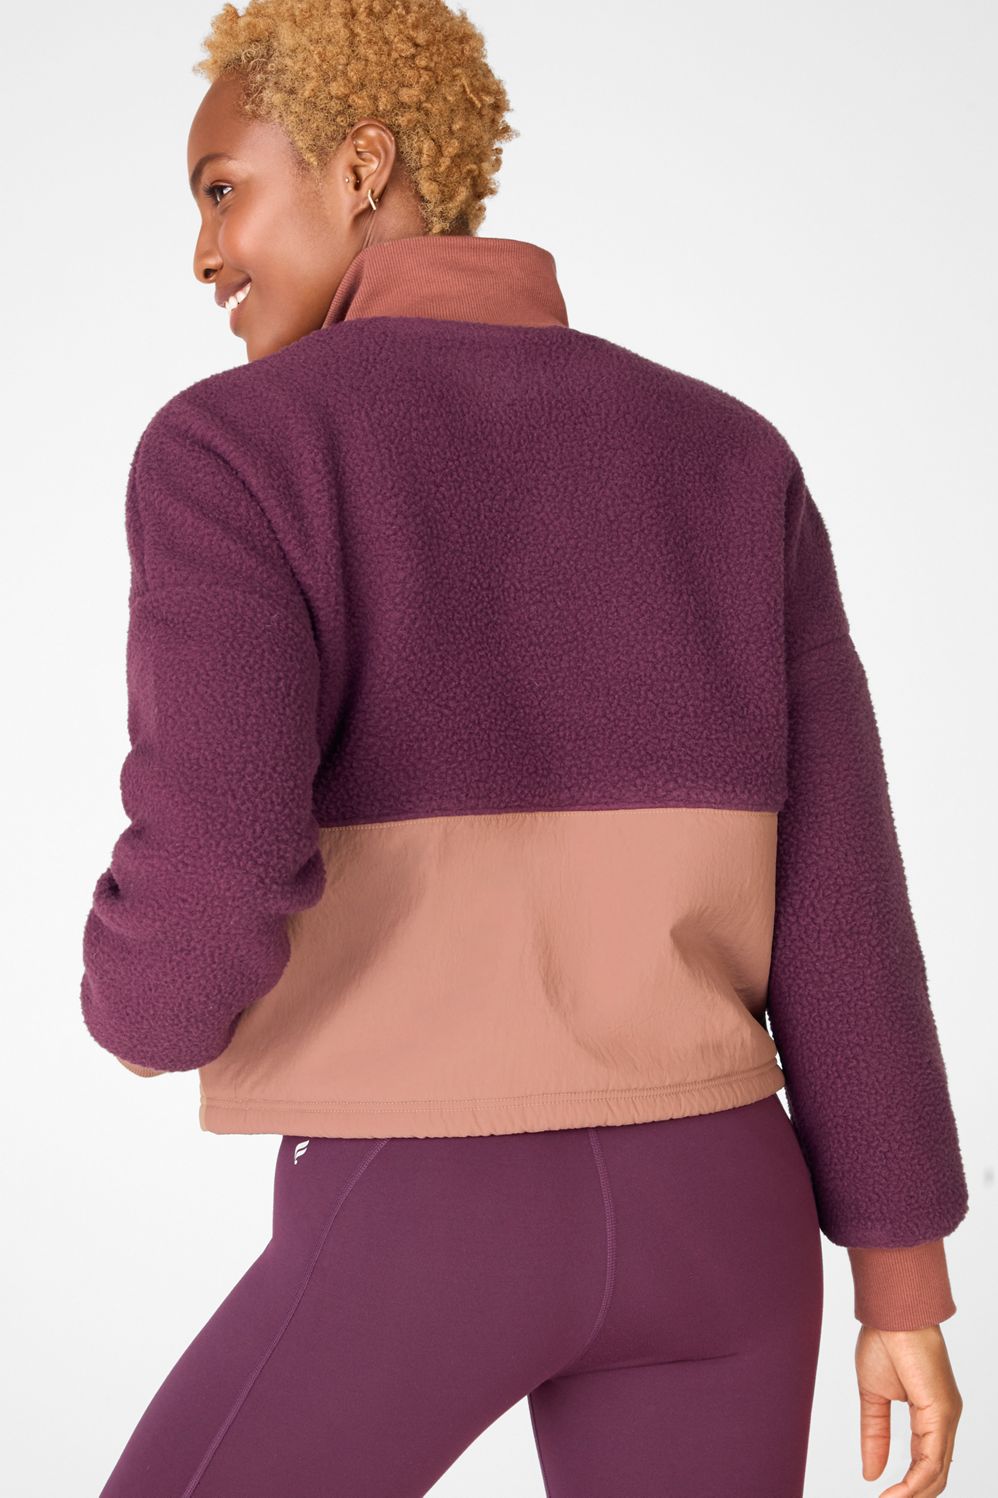 Fabletics FrostKnit dupe??? : r/OutdoorVoices